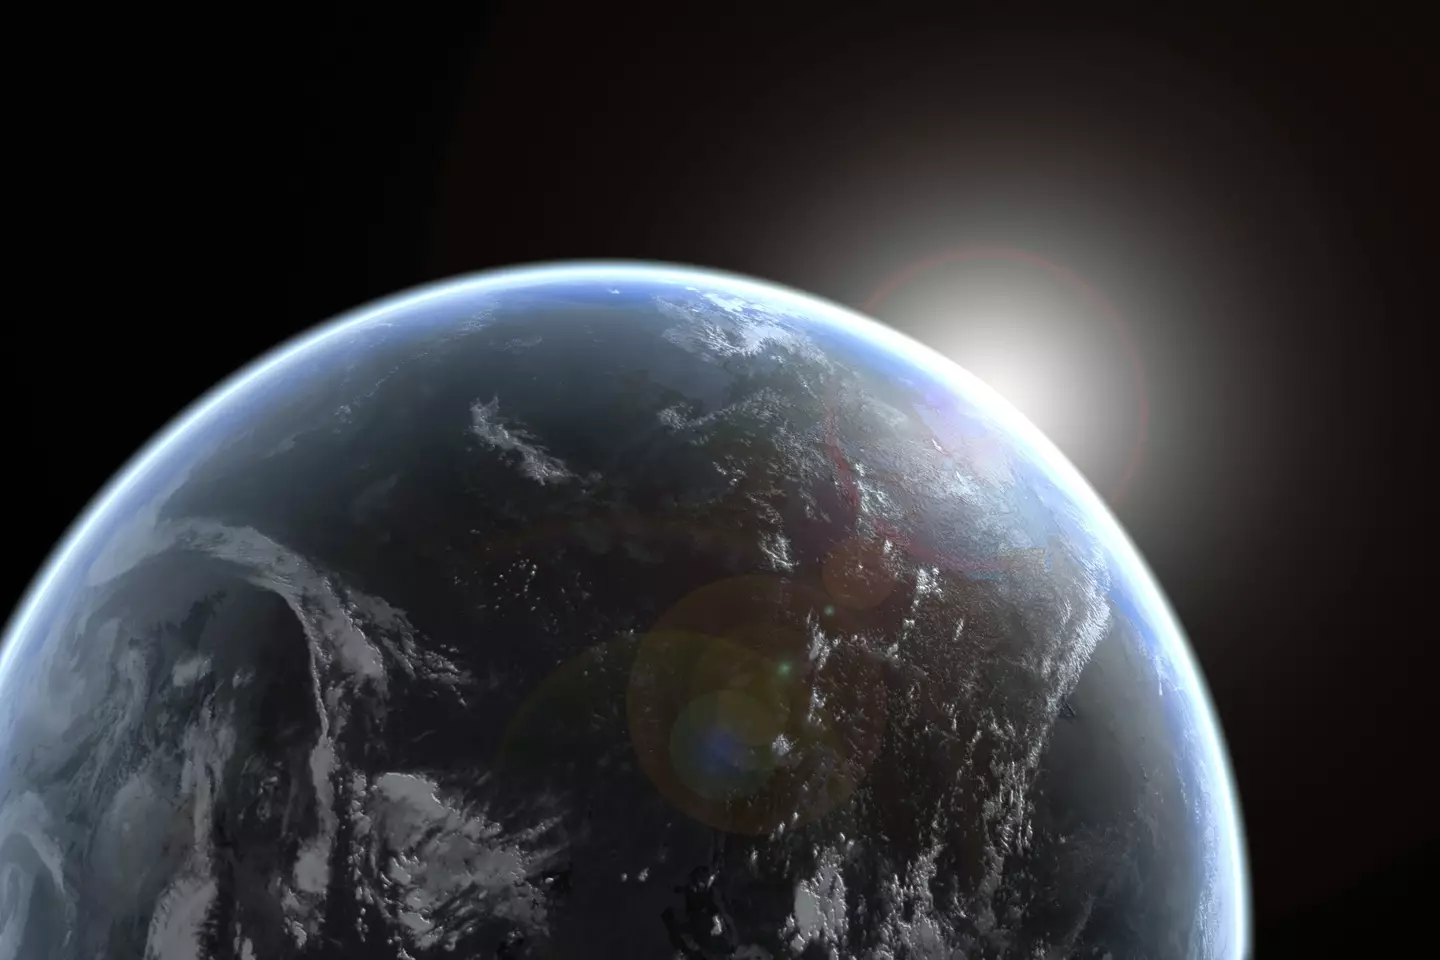 This new discovery could help us better understand how the Earth formed.